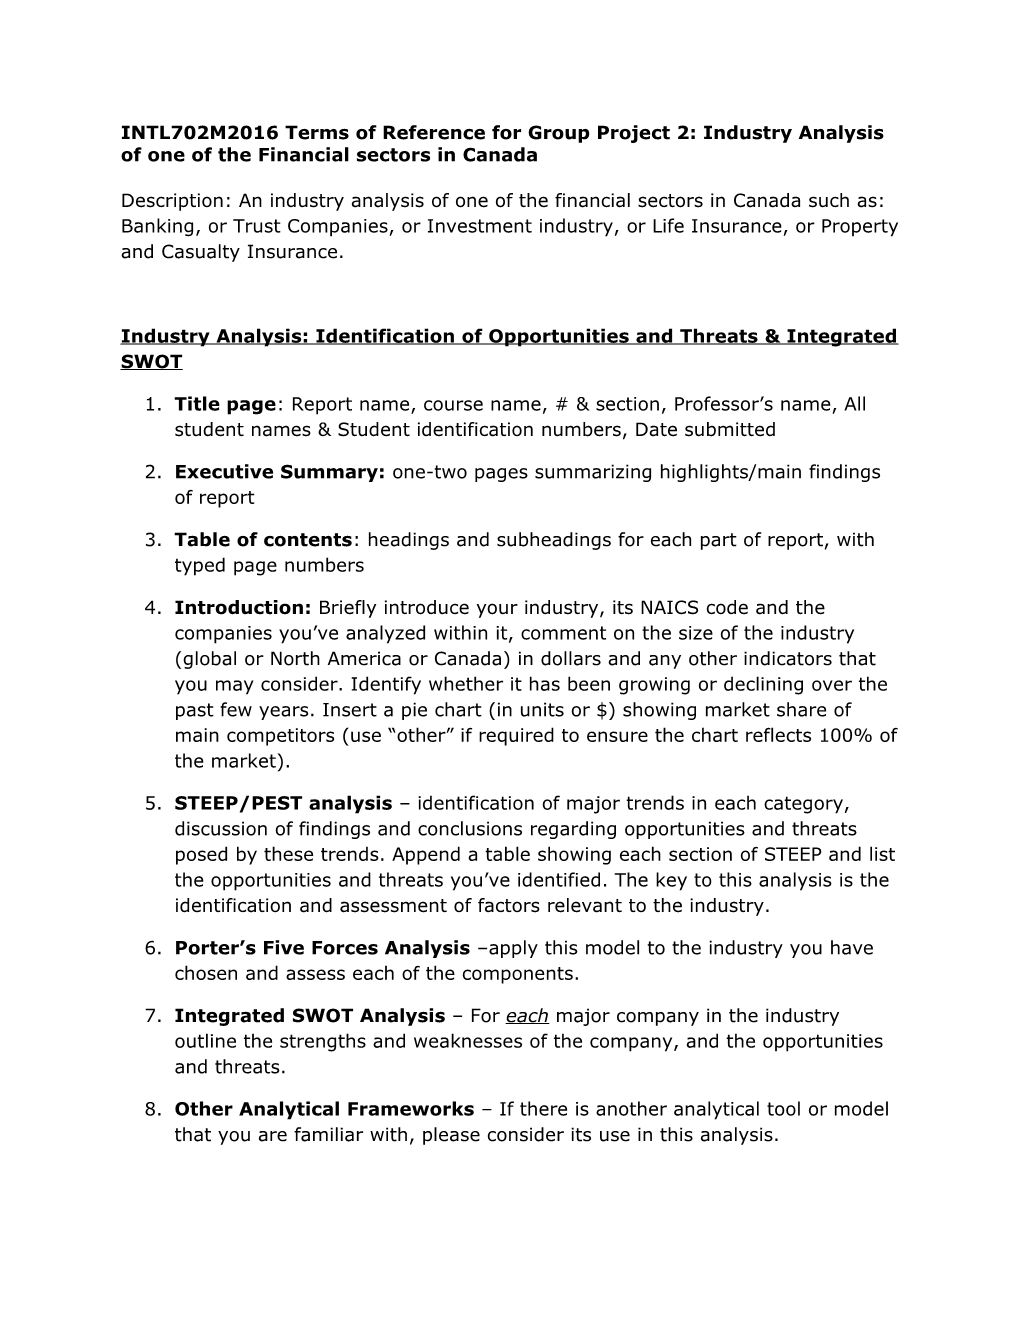 Industry Analysis: Identification of Opportunities and Threats & Integrated SWOT